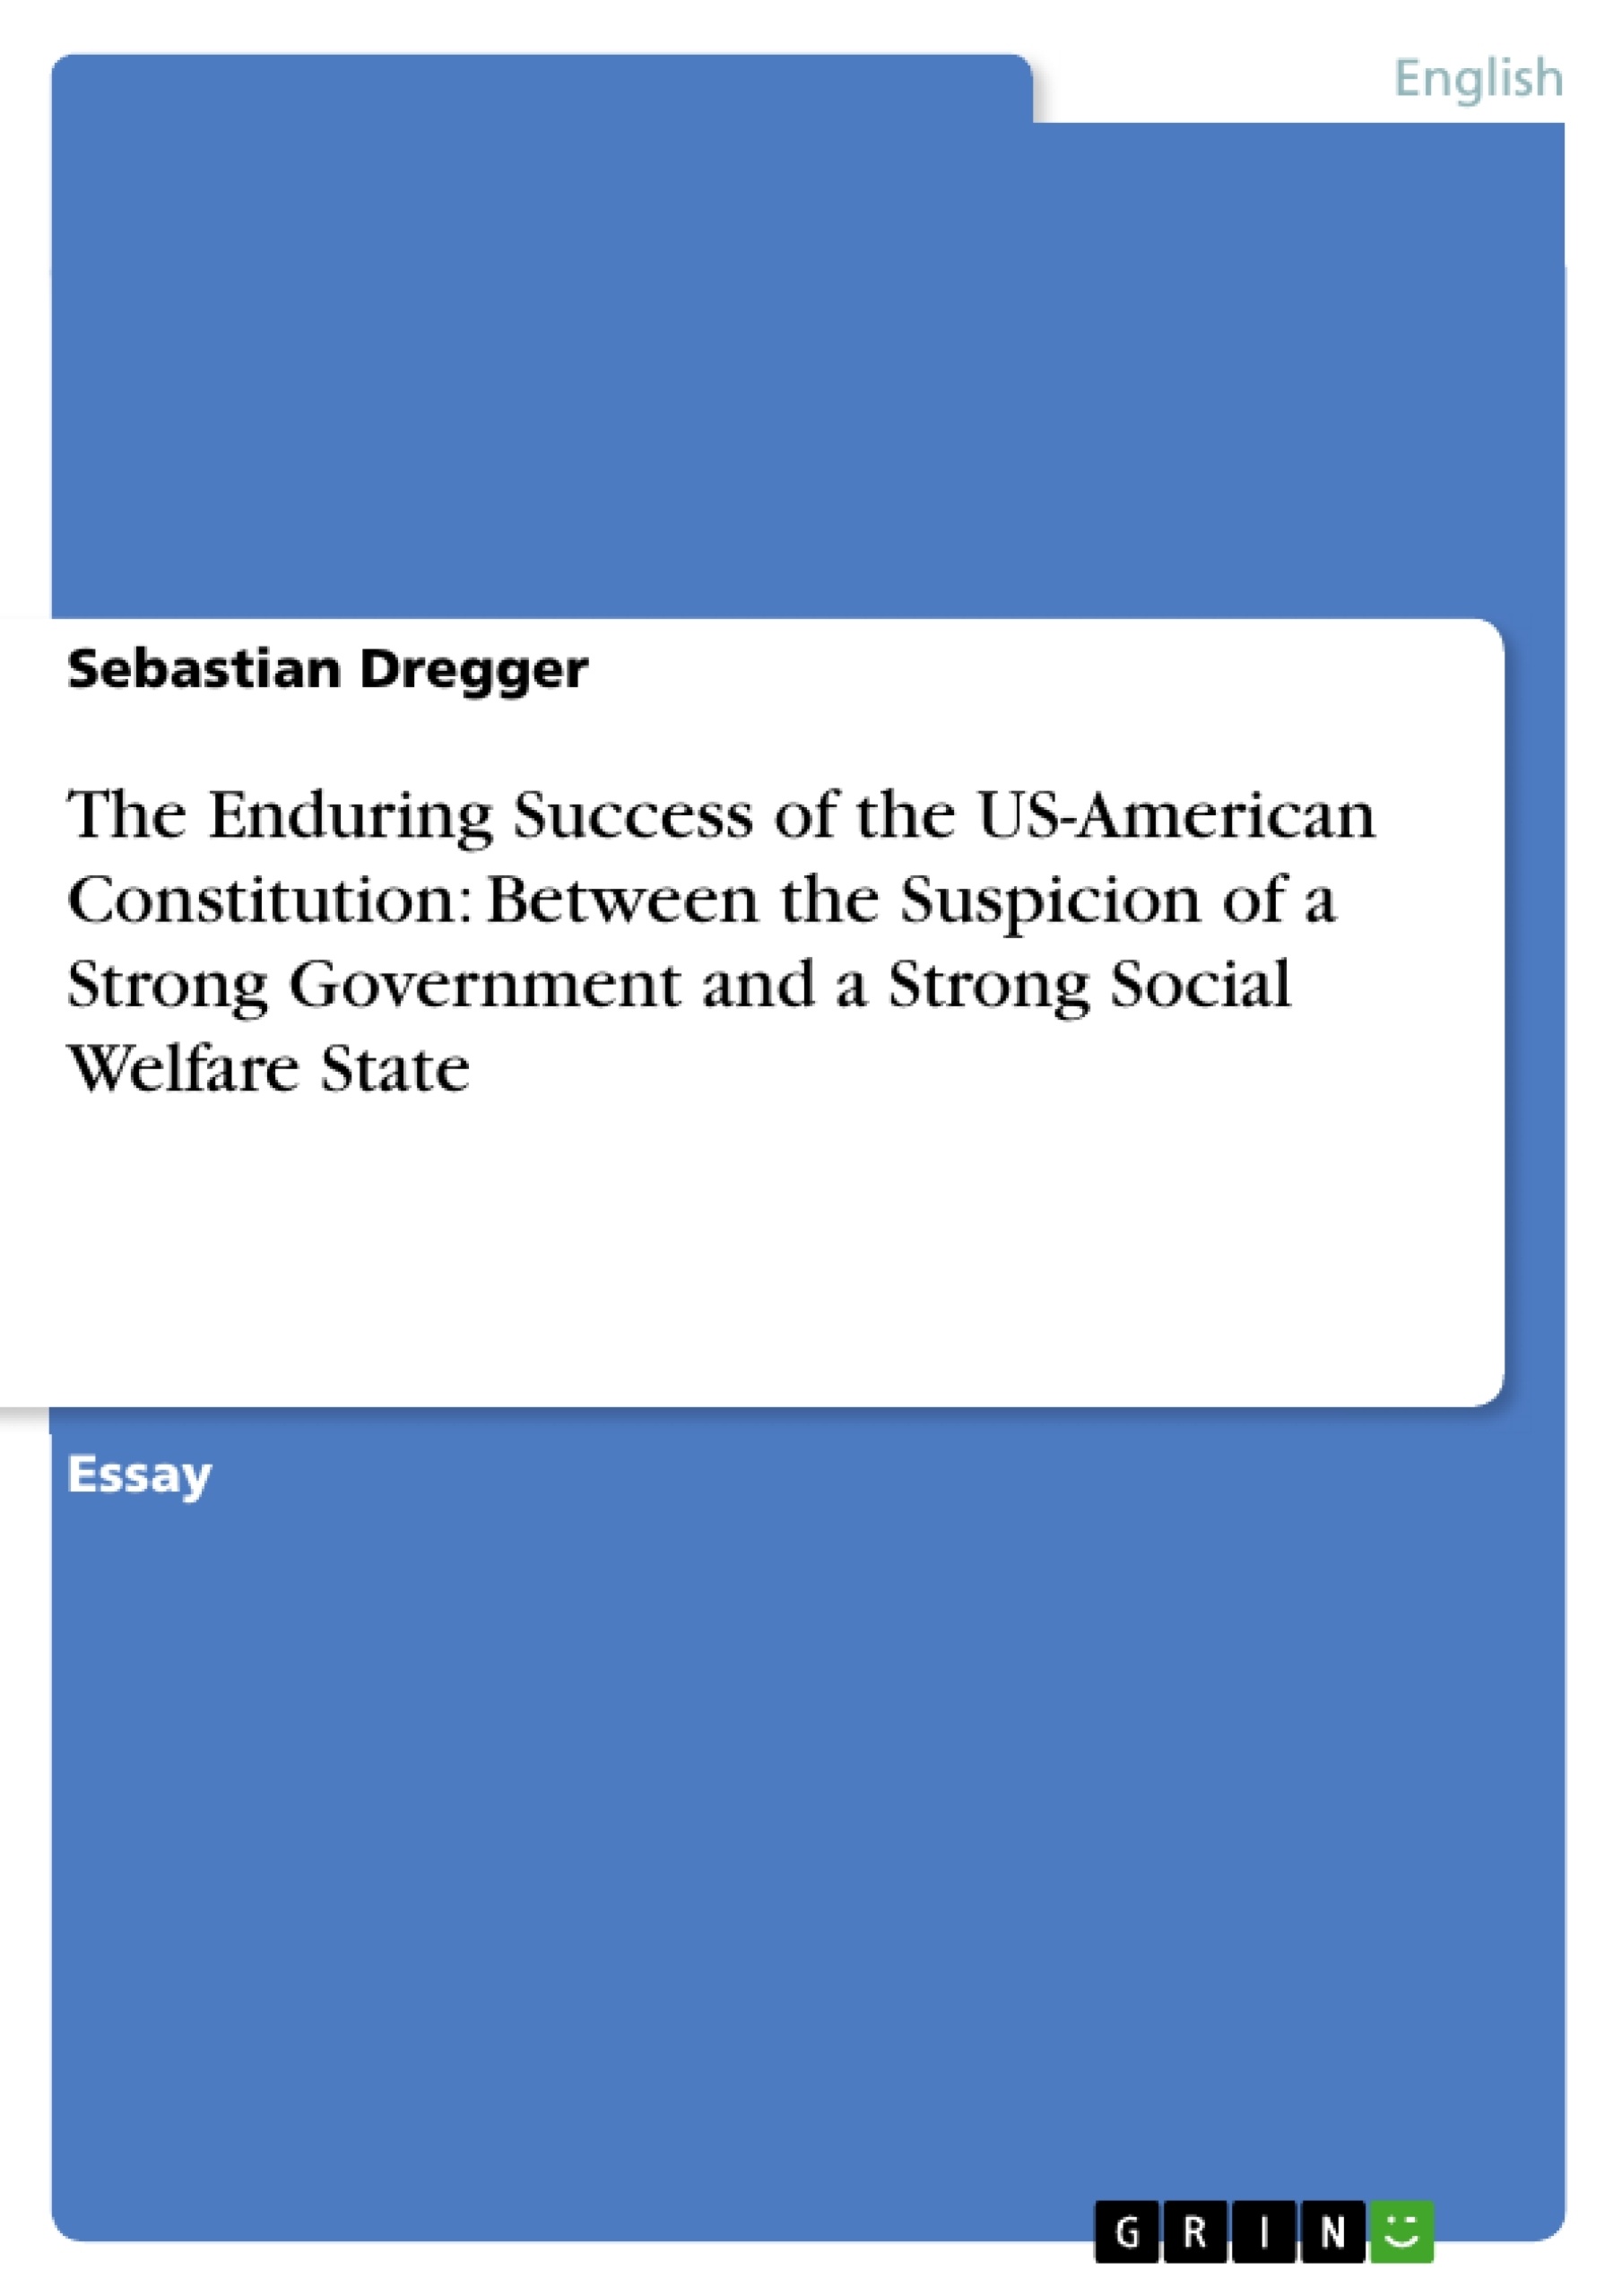 Título: The Enduring Success of the US-American Constitution: Between the Suspicion of a Strong Government and a Strong Social Welfare State